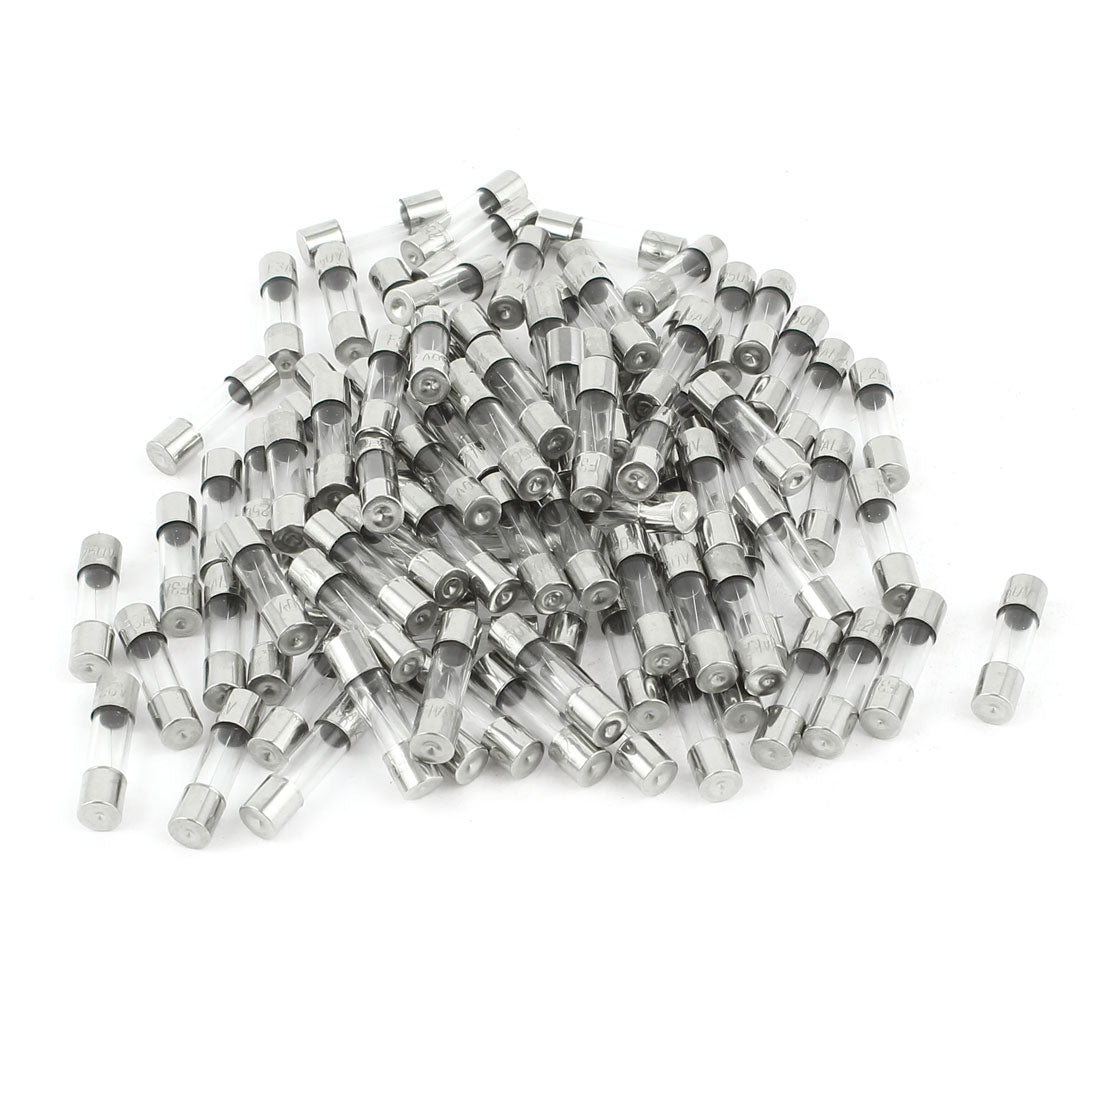 uxcell Uxcell 100 Pcs 250V 2A F2AL Quick Fast Blow Glass Tube Fuses 5 x 20mm